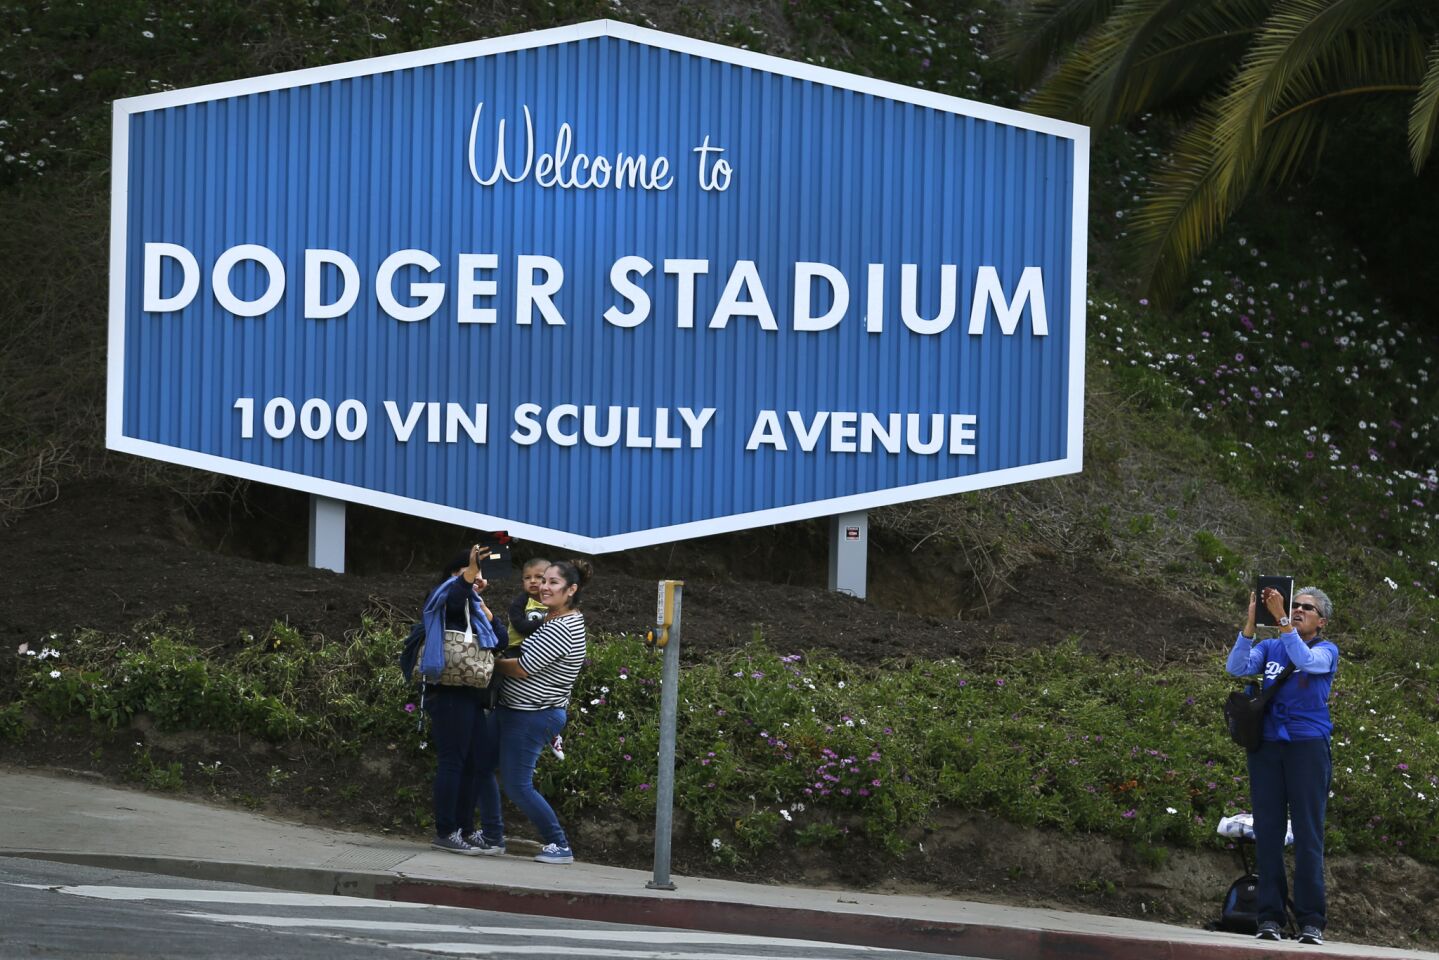 People gather to take photographs along the newly named Vin Scully Avenue.